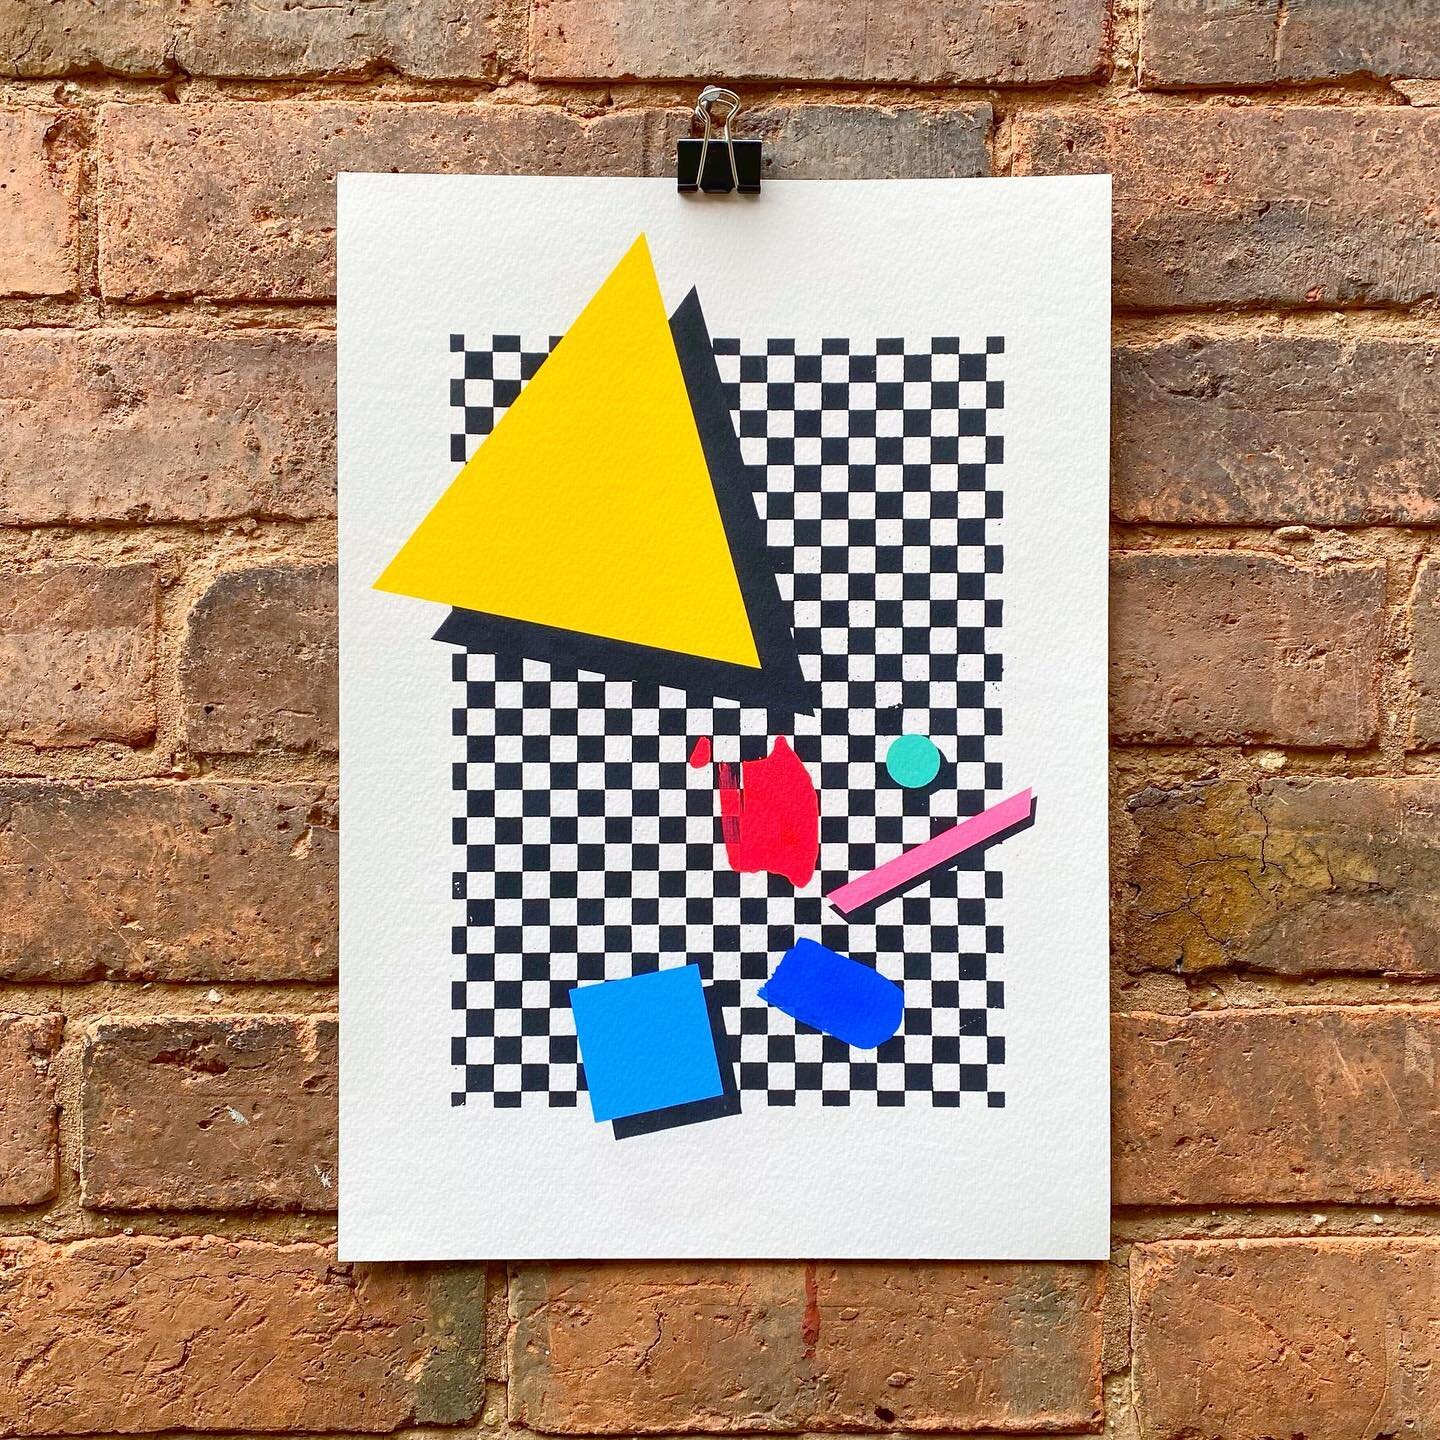 My latest print (Pr.fthy.02.23.) now available online!

Thanks again to the folks at @precision.imaging 🙏🏼 

A3 - &pound;25
A4 - &pound;15
A5 - &pound;6

📦 Free Shipping 📦
.
.
.
.
.
#abstractillustration #illustration #artistsoninstagram #artofin